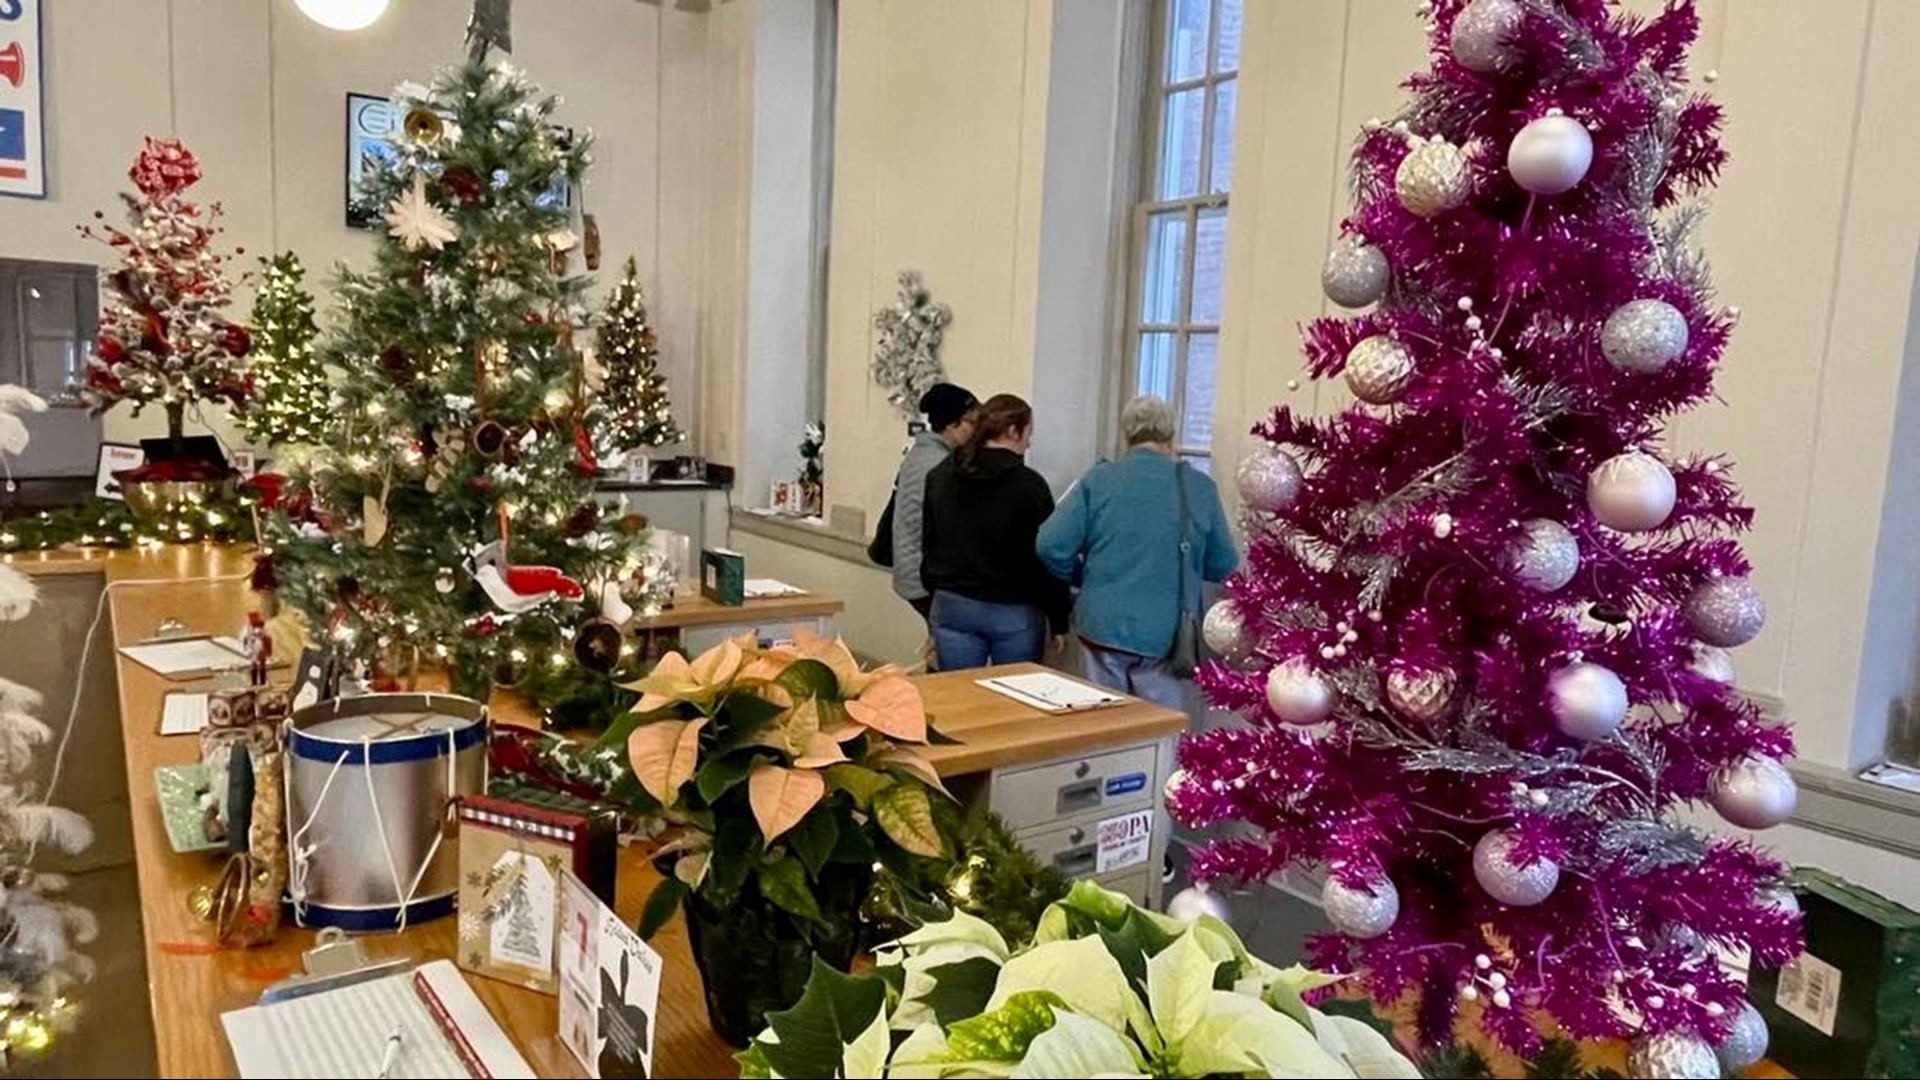 The Franklin County Visitors Bureau launched its fourth annual Festival of Trees in downtown Chambersburg on Nov. 21.